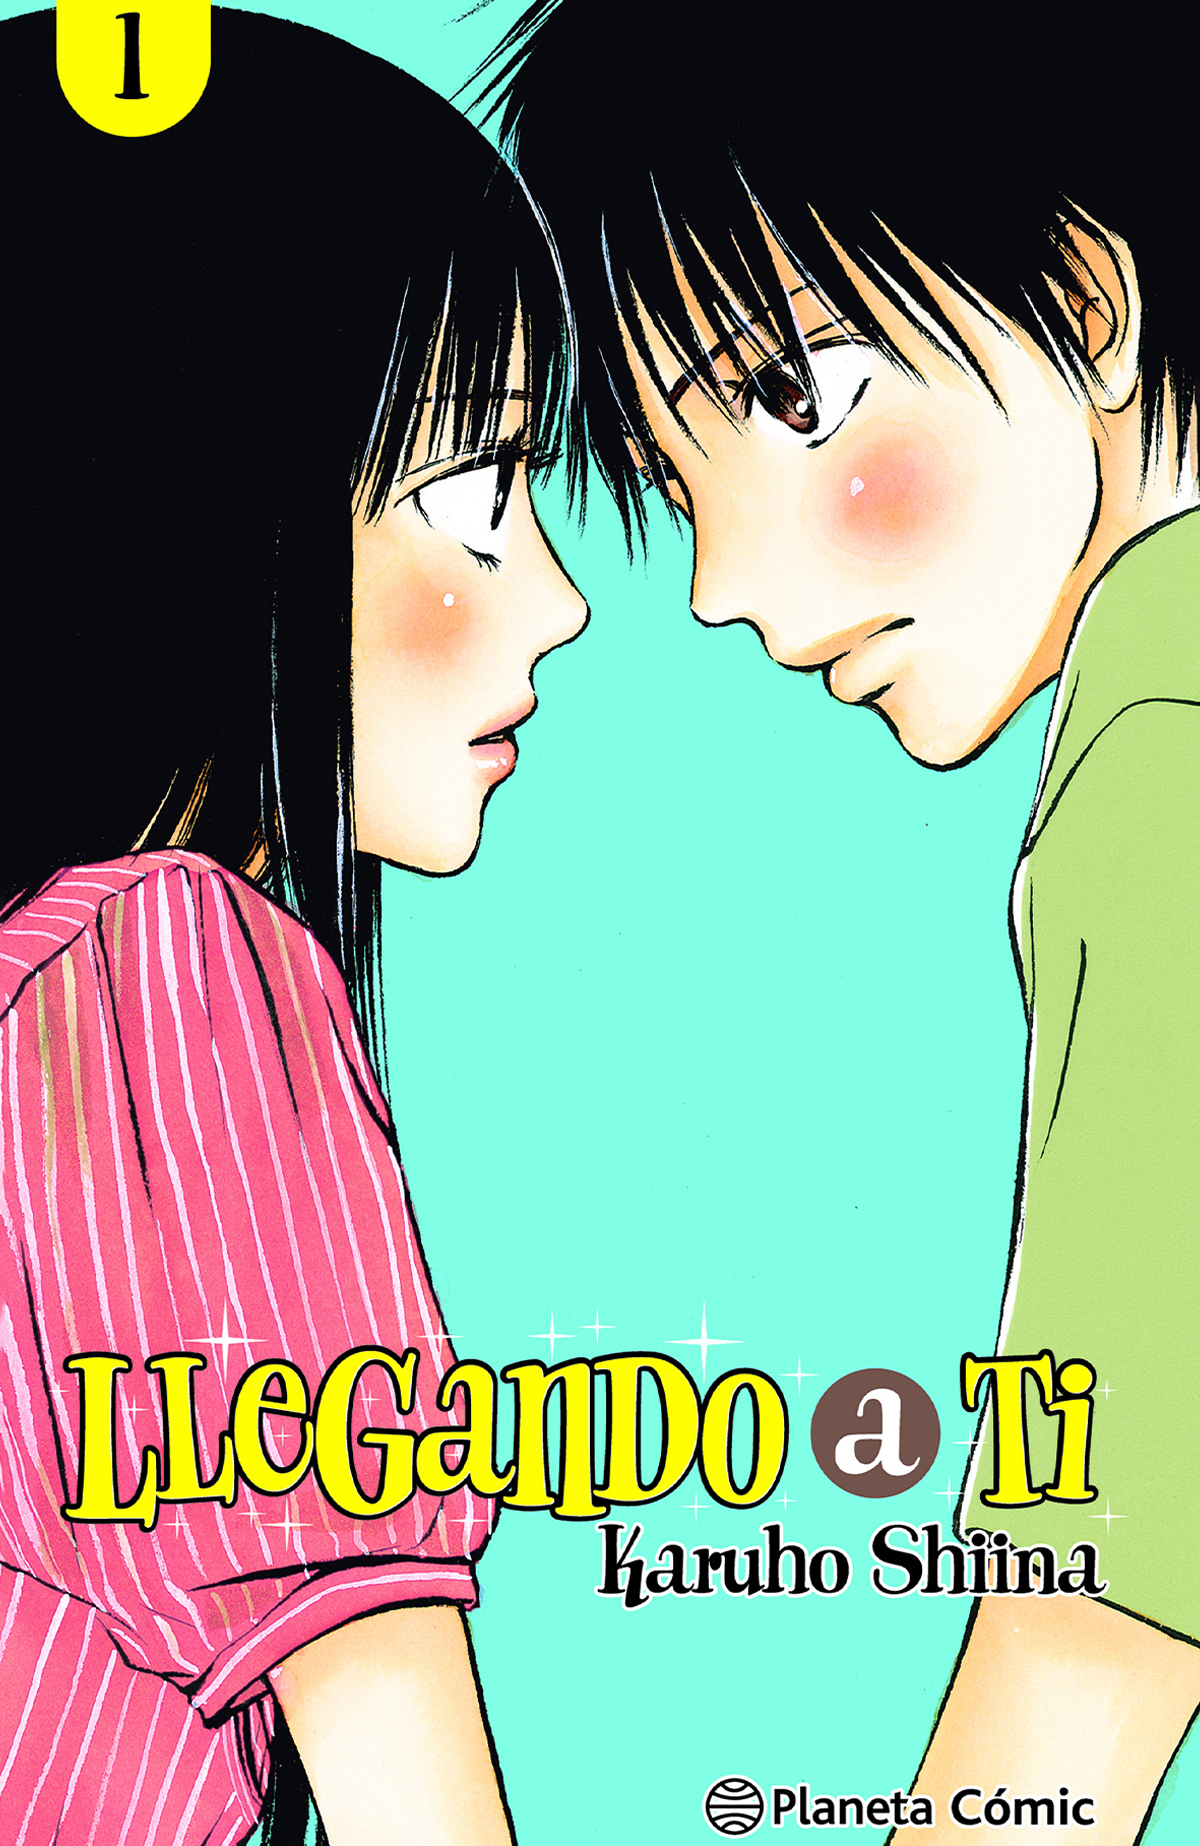 'Coming to you' cover of the manga.